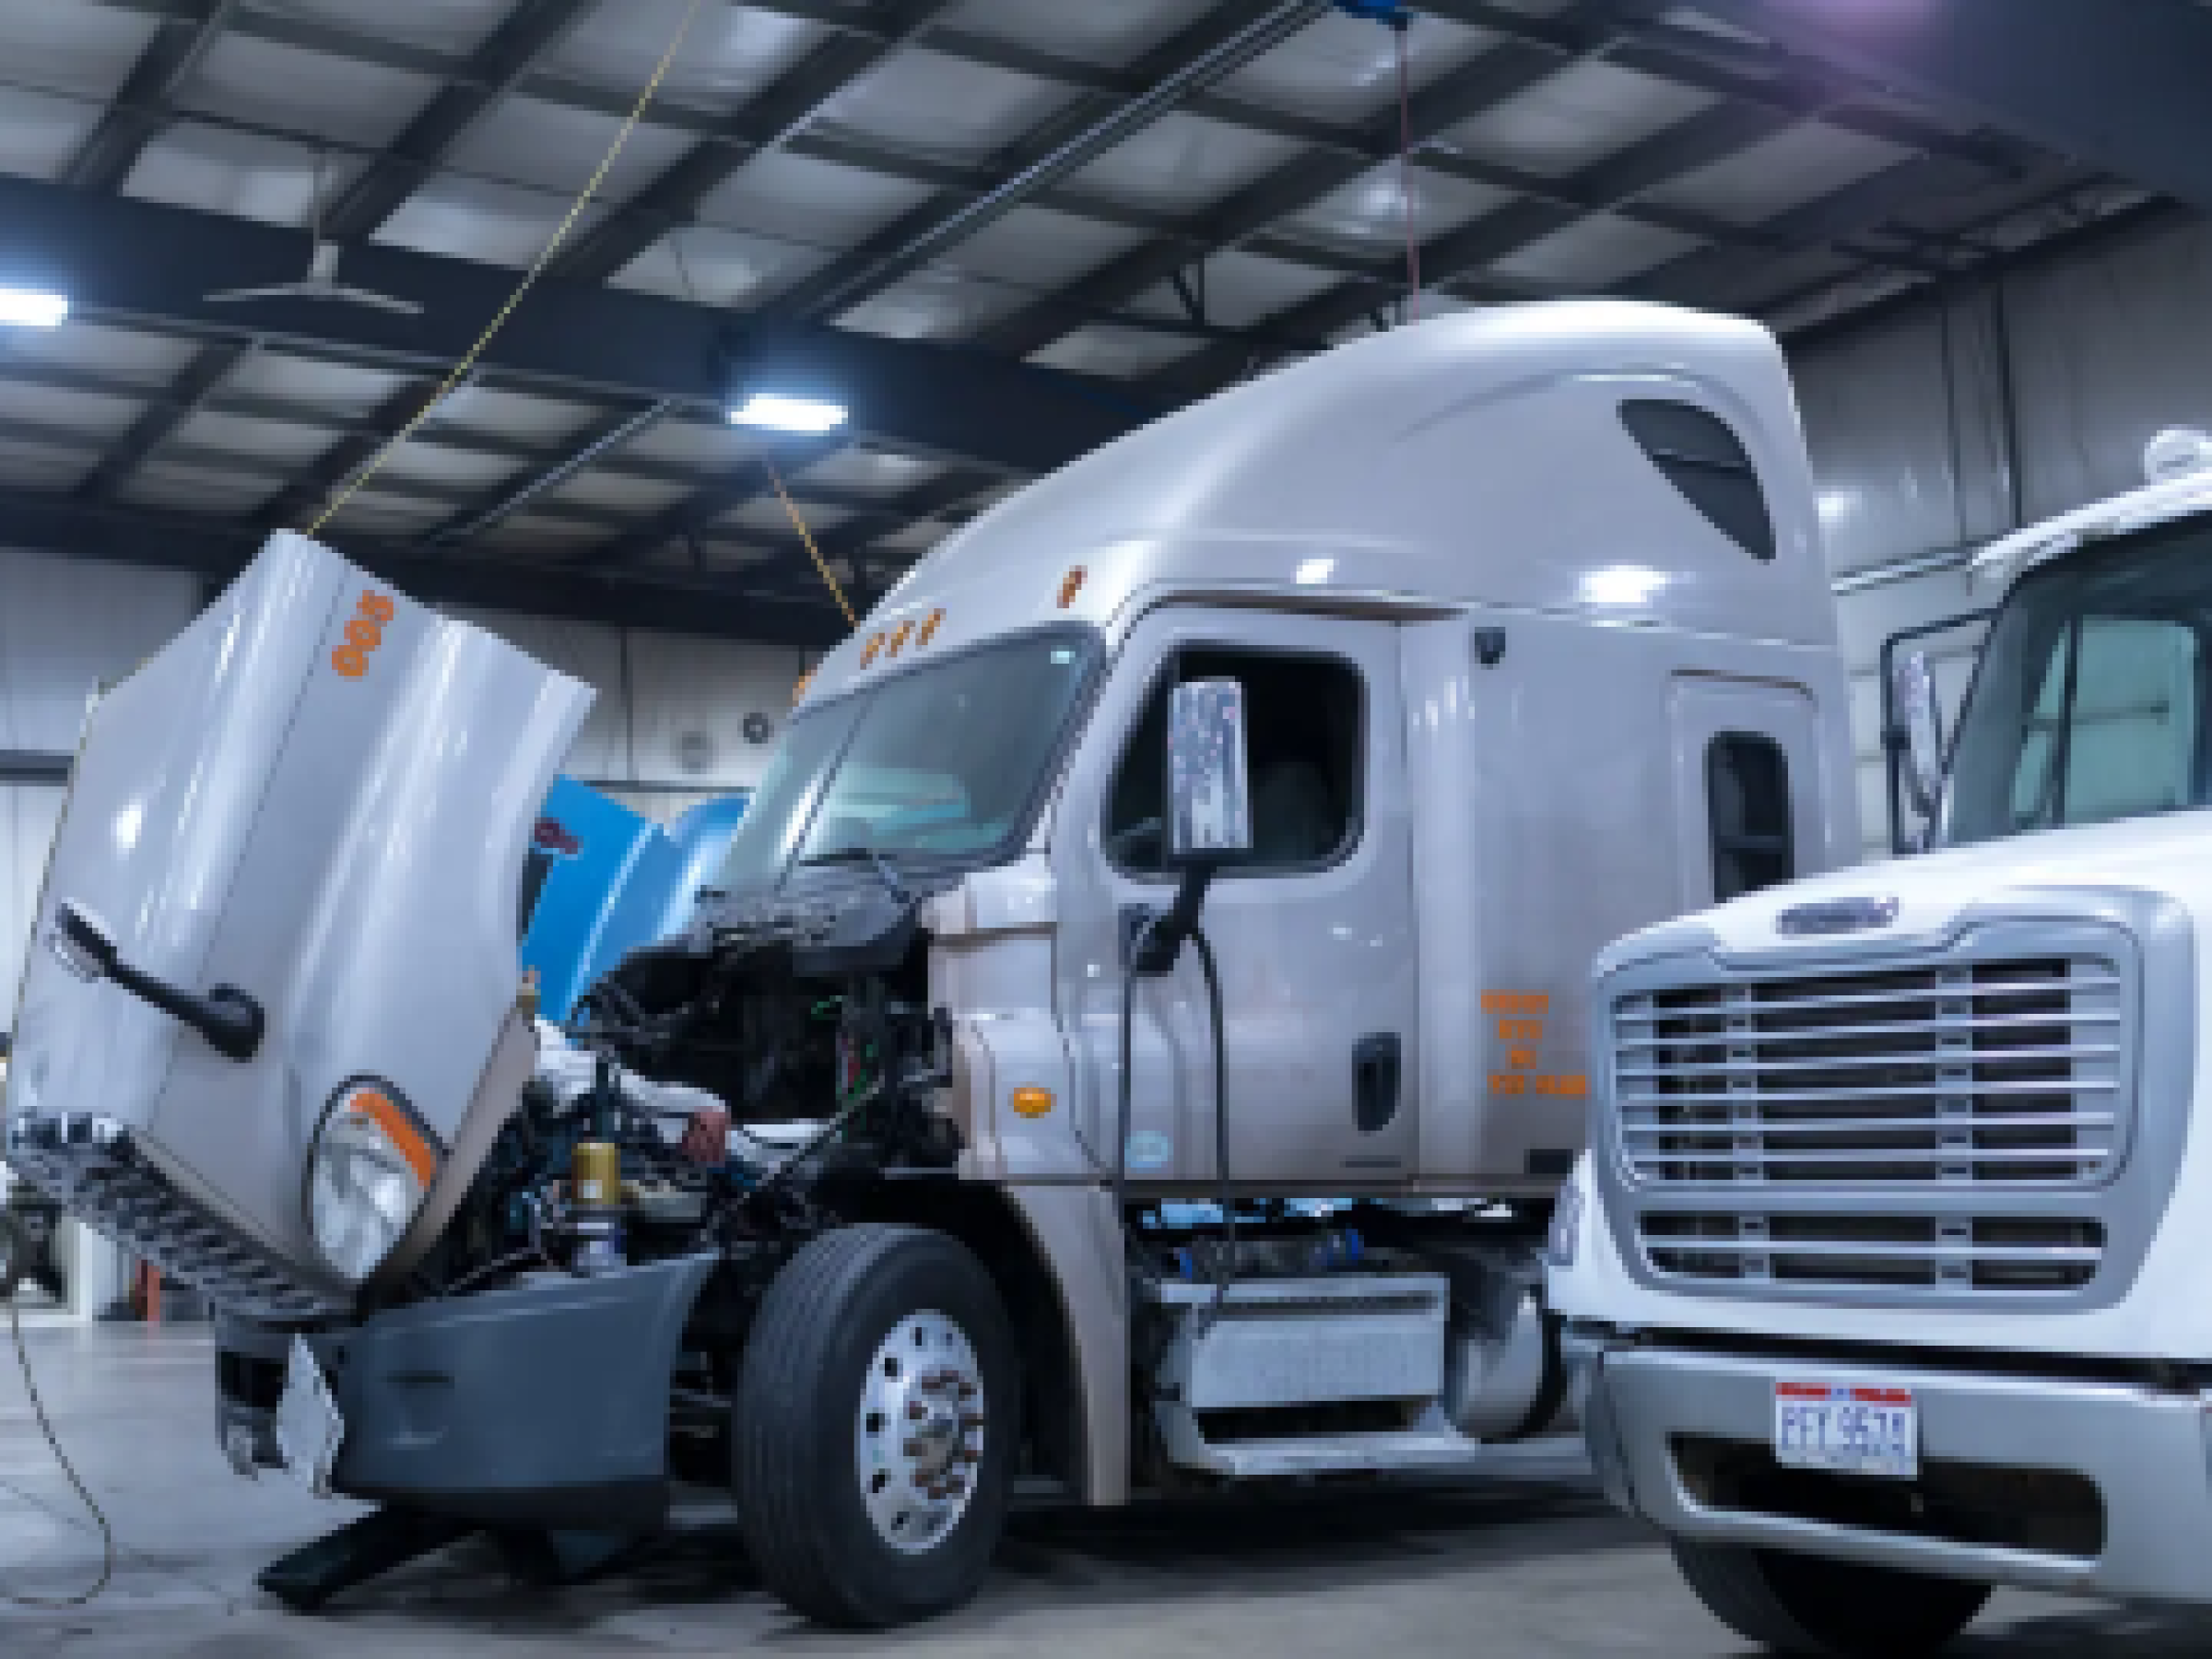 Finding Truck Repair Services Near You in Fresno, CA